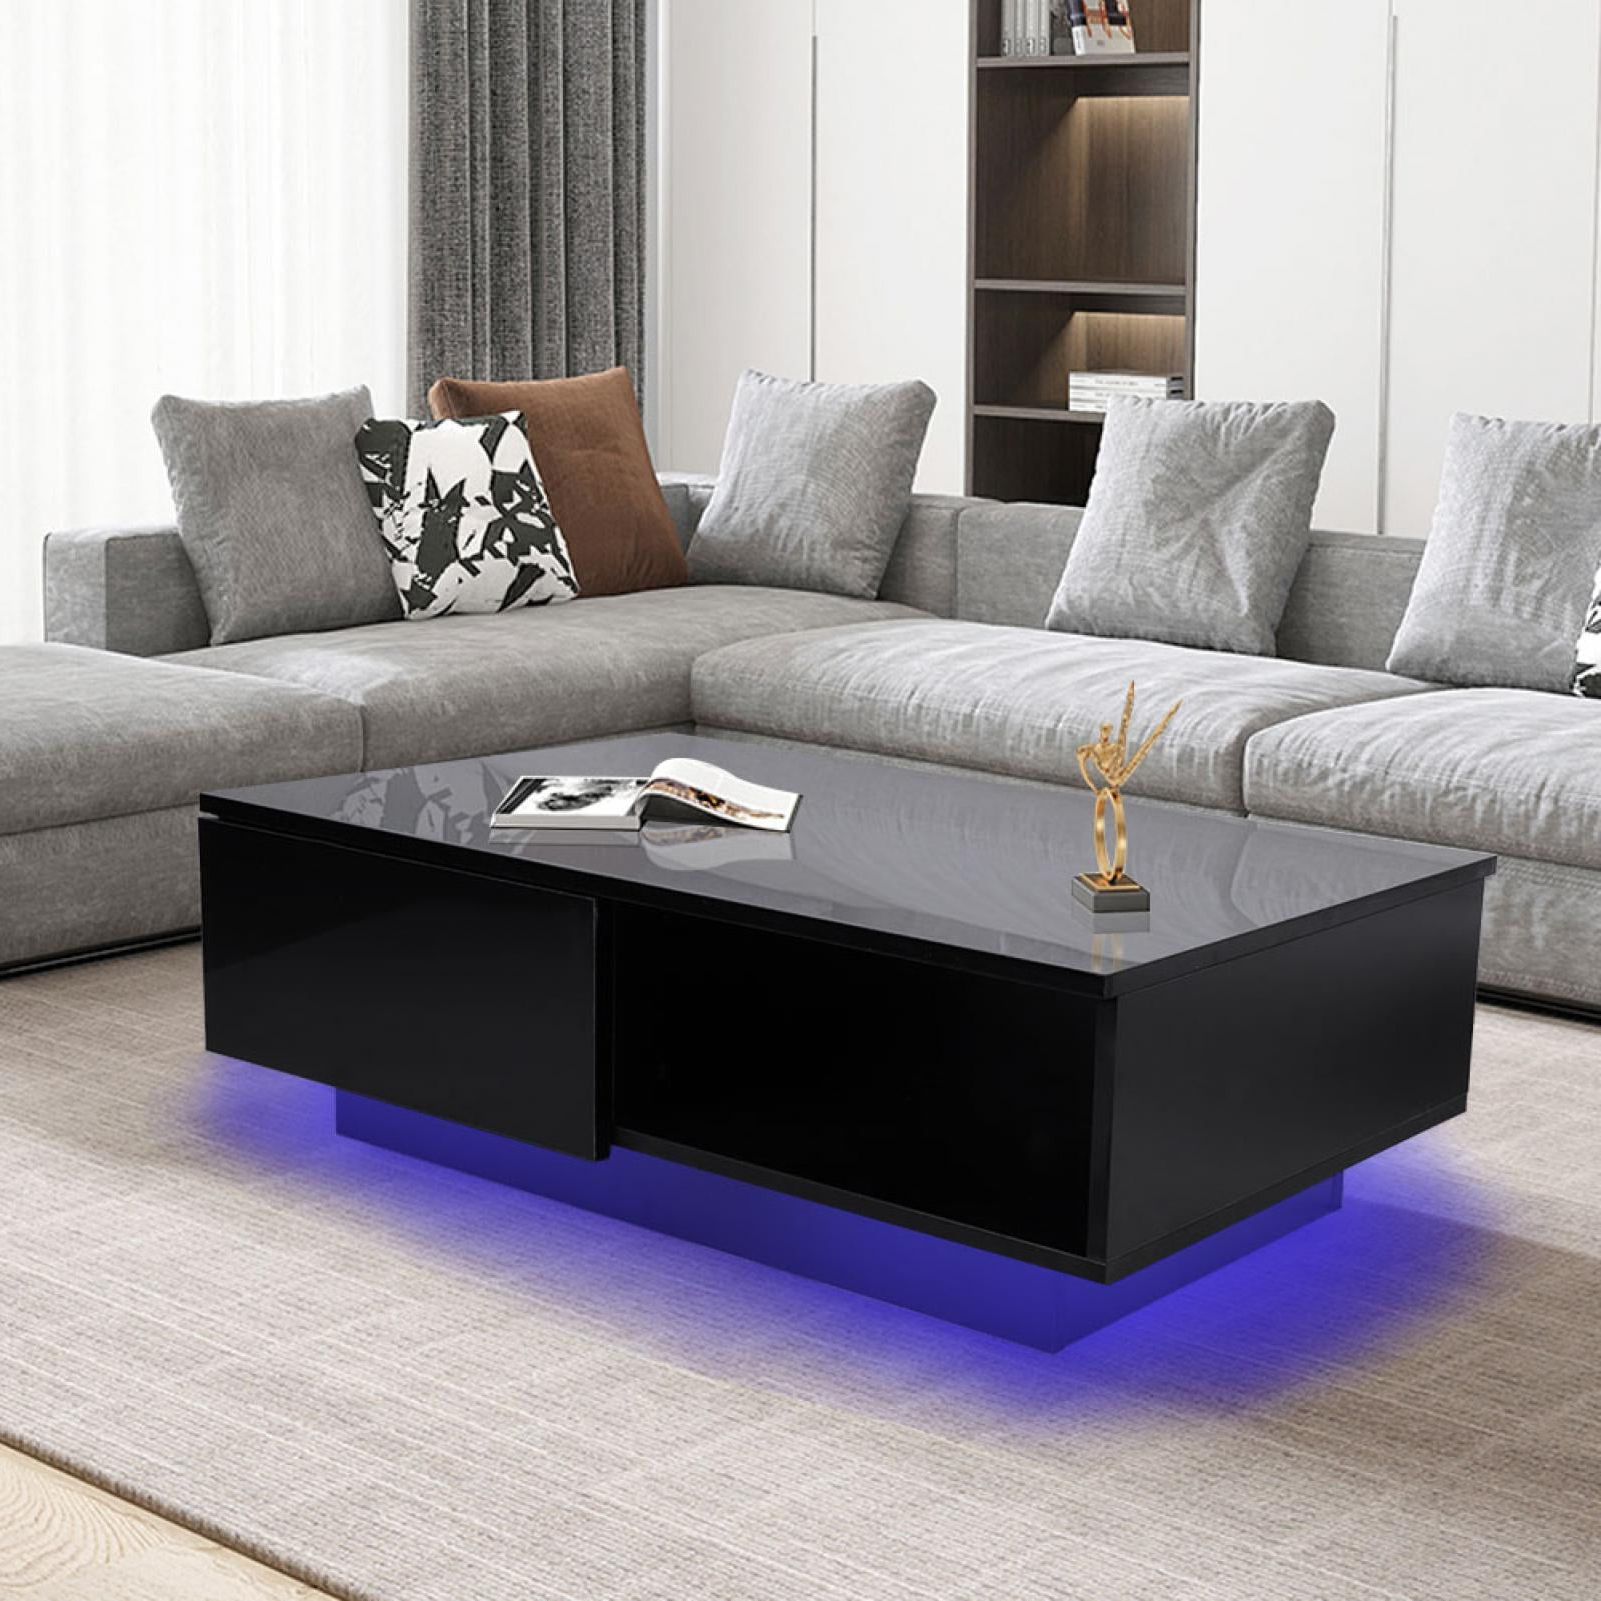 Well Liked Ebtools Rectangle Led Coffee Table, Black Modern High Gloss Furniture With Regard To Rectangular Led Coffee Tables (Photo 6 of 15)